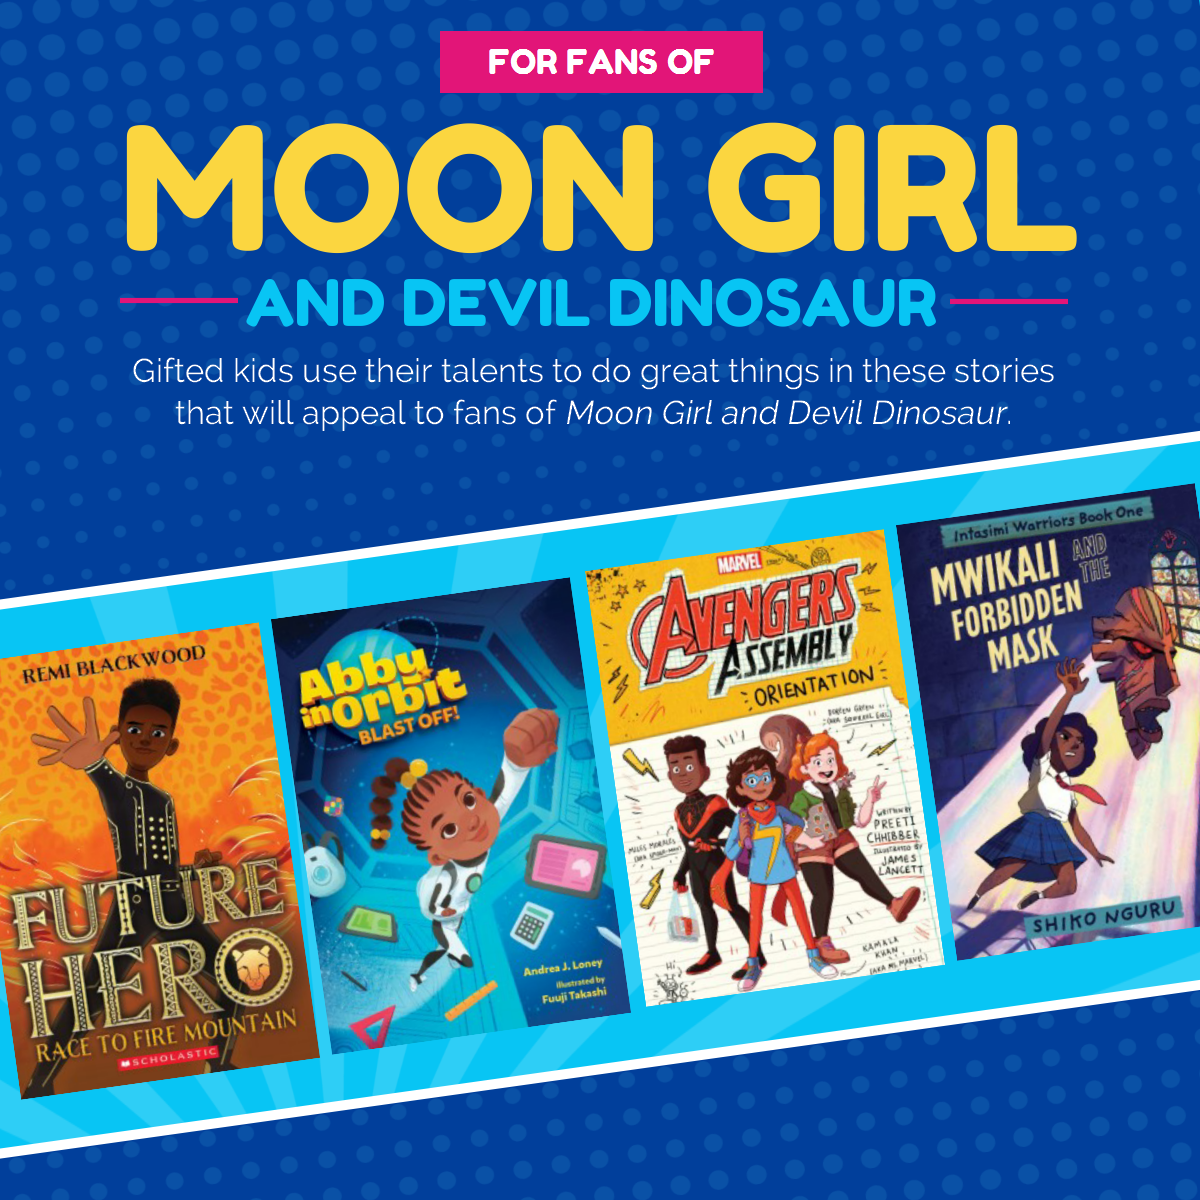 Link to book list for fans of "Moon Girl and Devil Dinosaur" TV show.